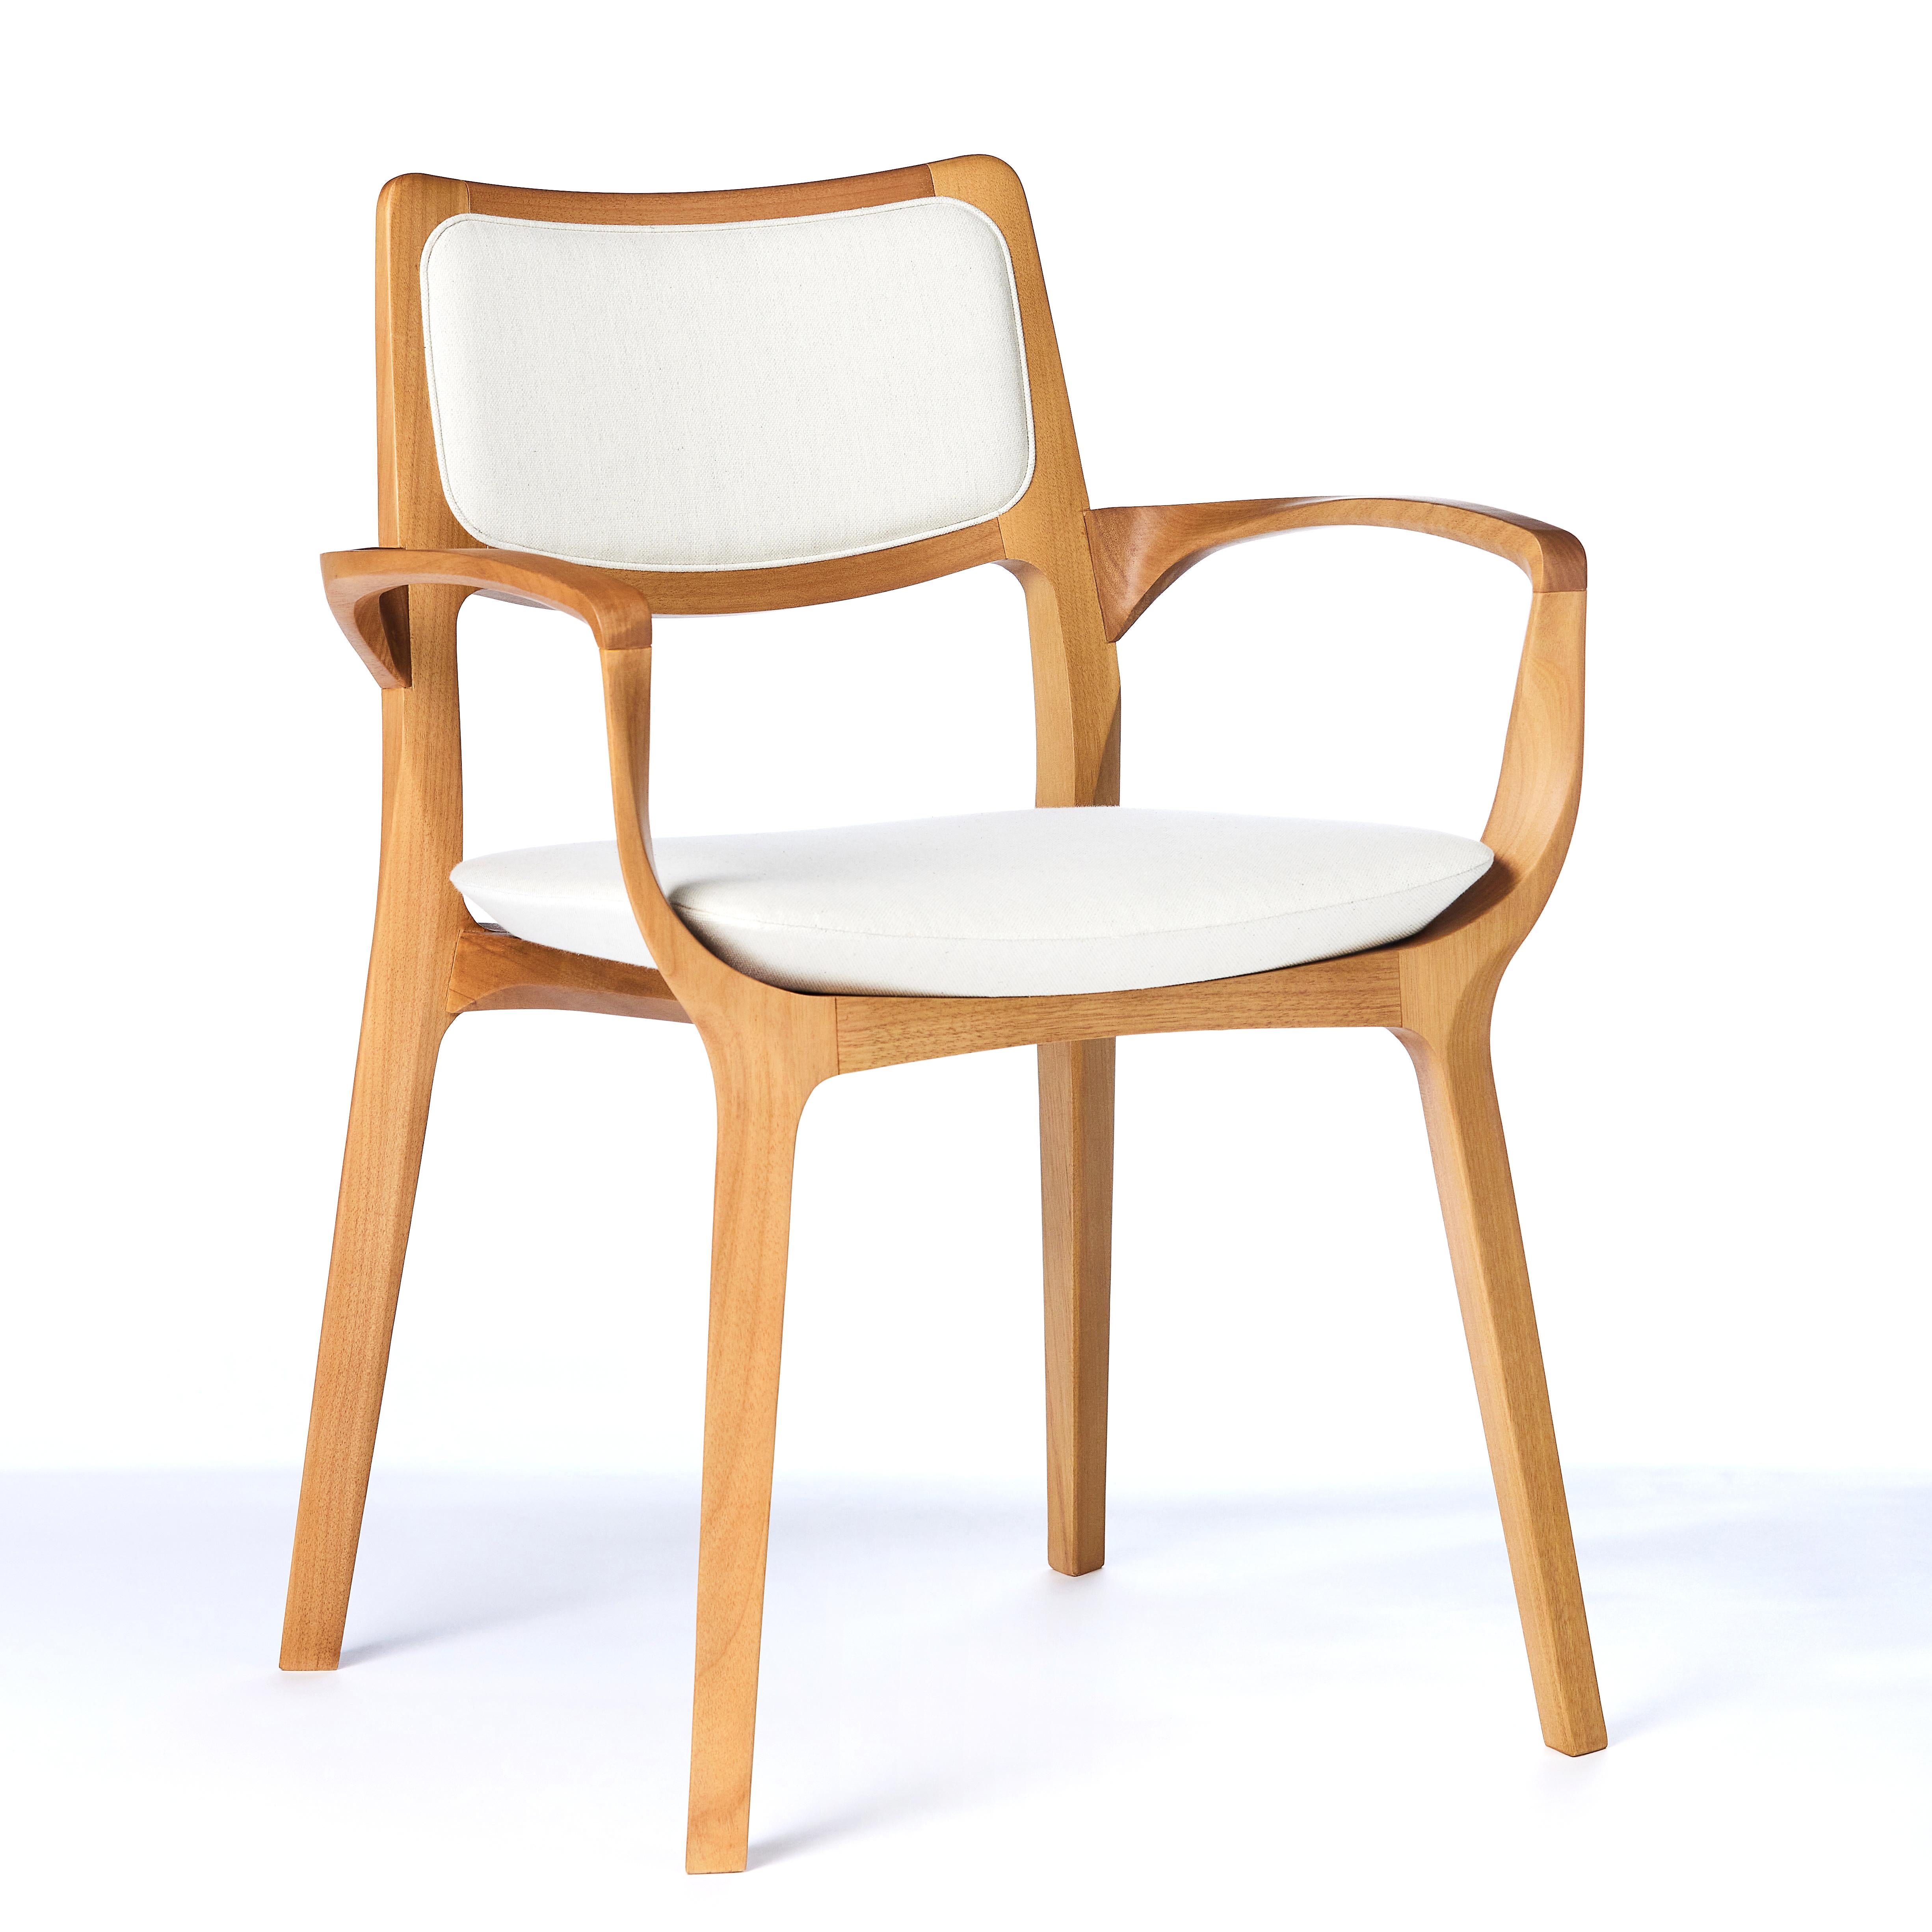 Caning Post-Modern Style Aurora Sculpted Chair in Natural Finish No Arms, Solid Seat For Sale